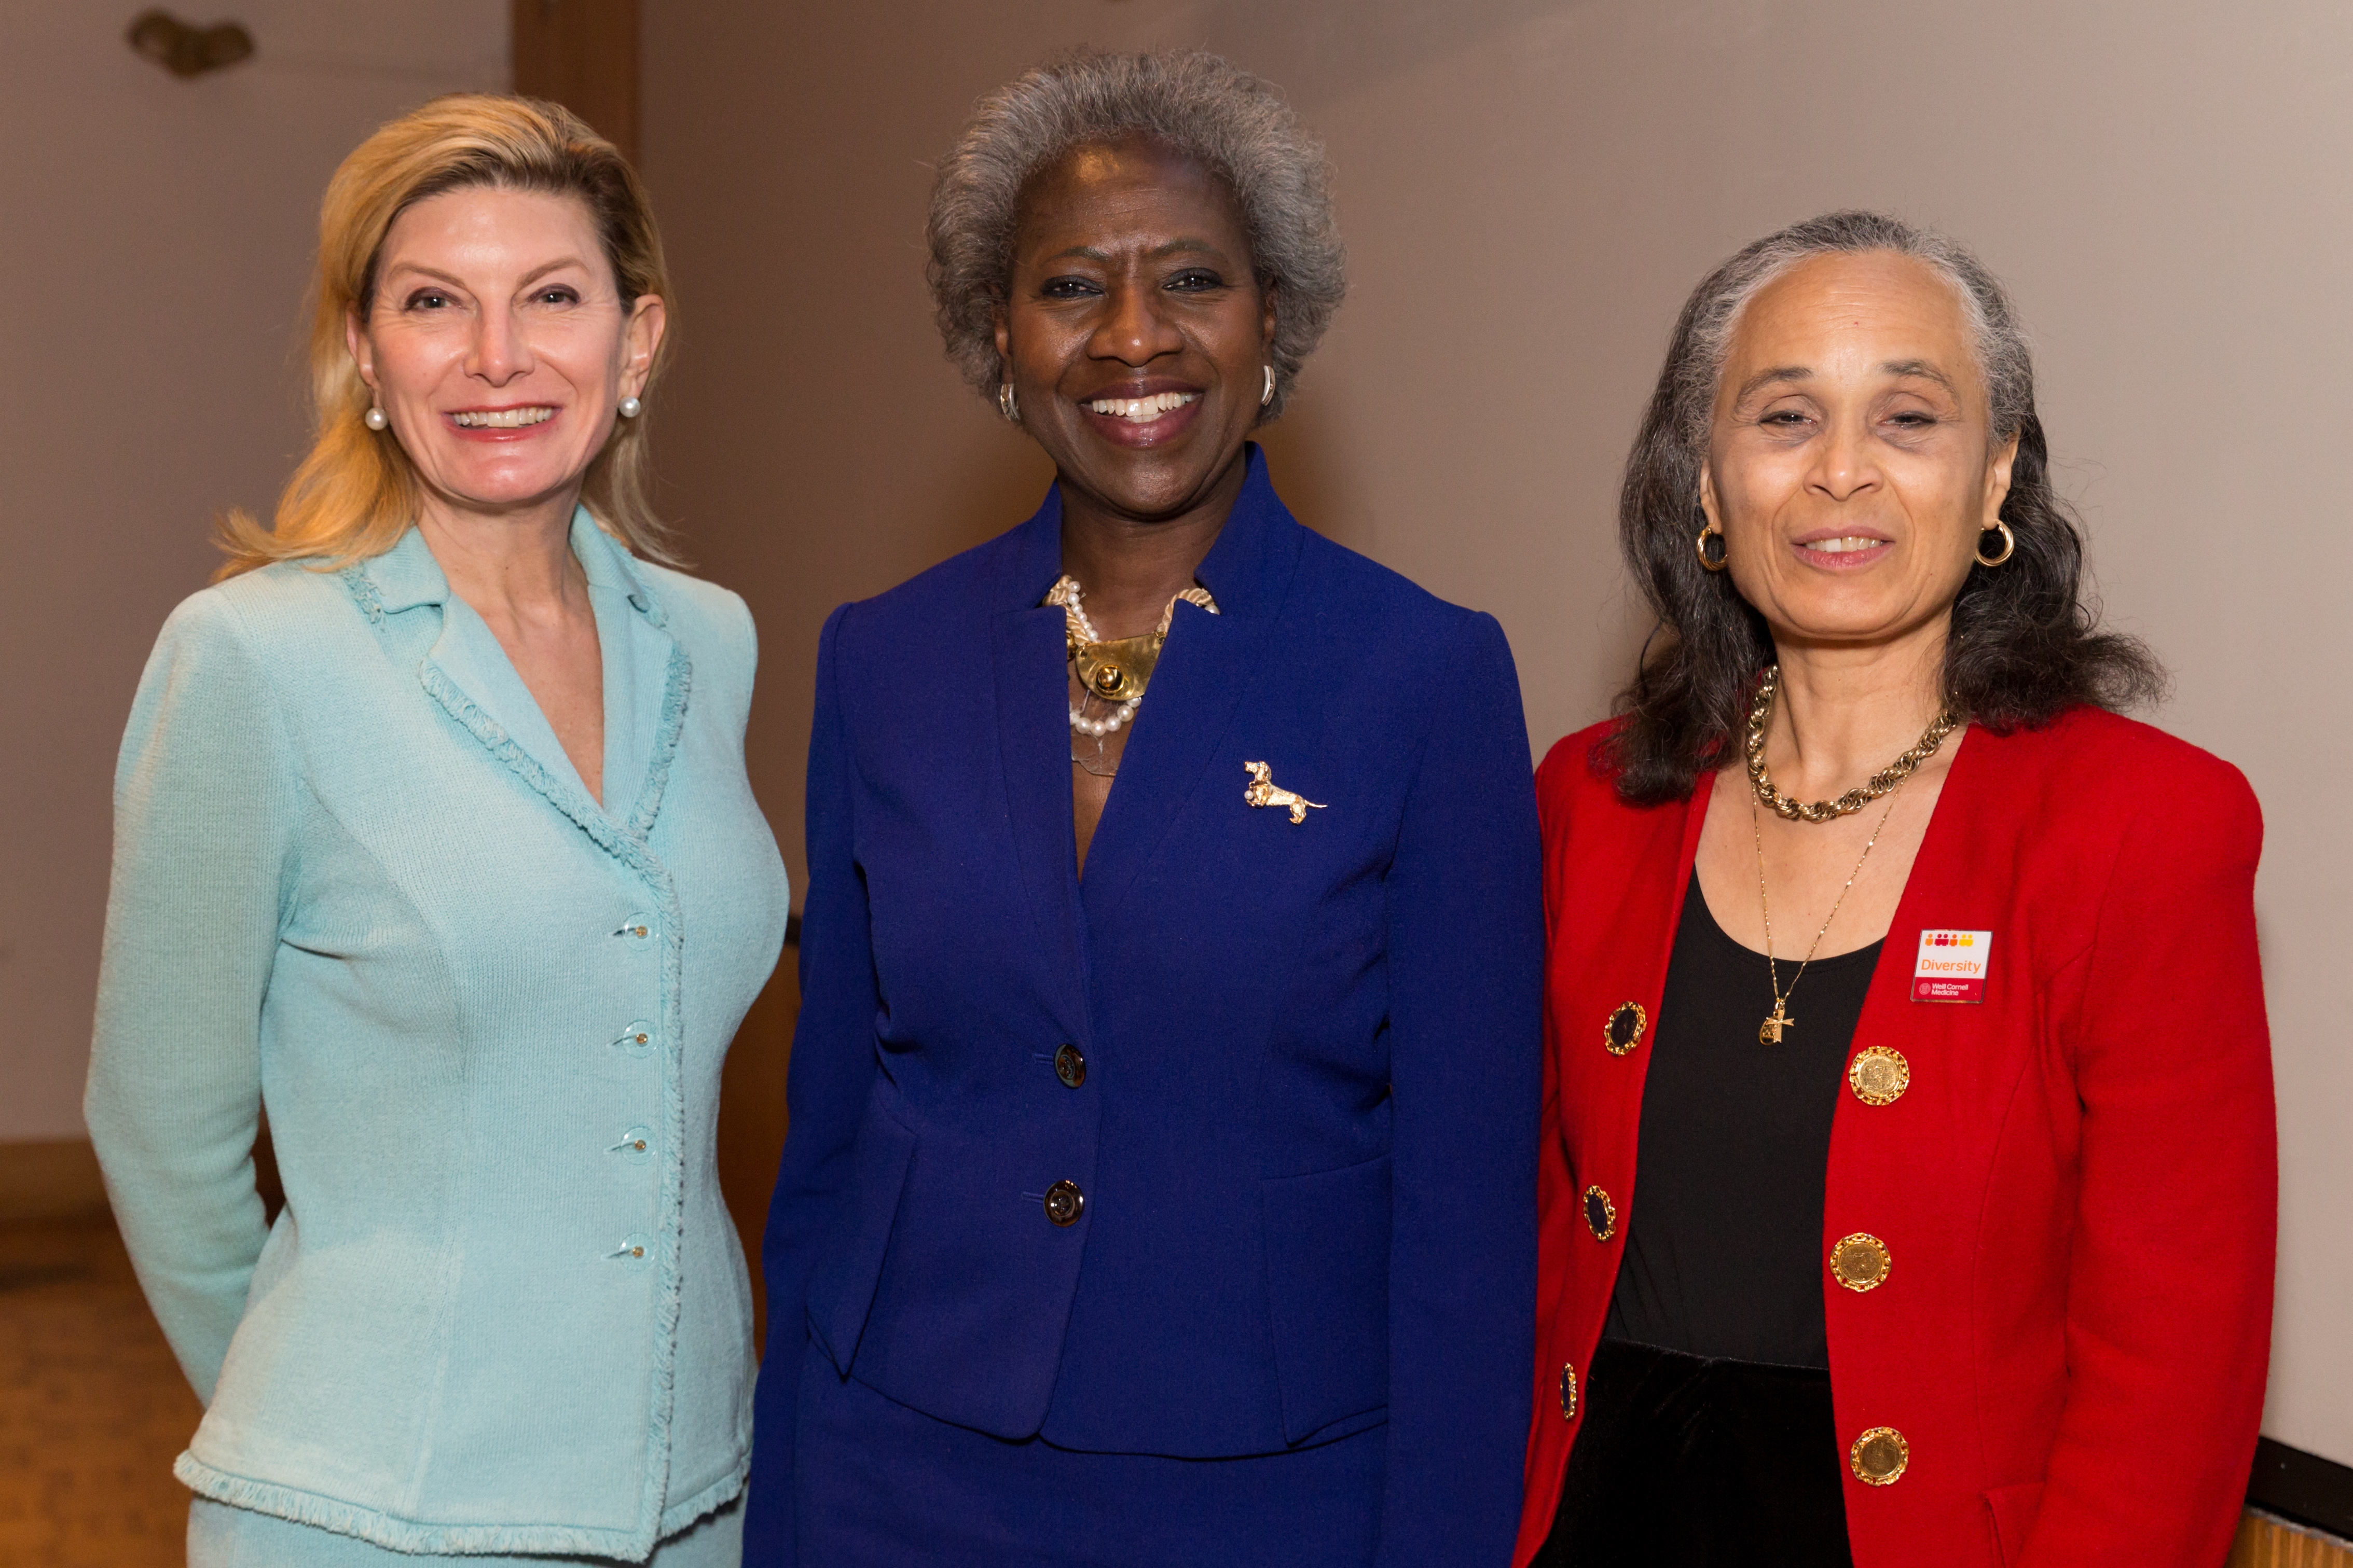 From left: Drs. Rache Simmons, Hannah Valantine and Linnie Golightly